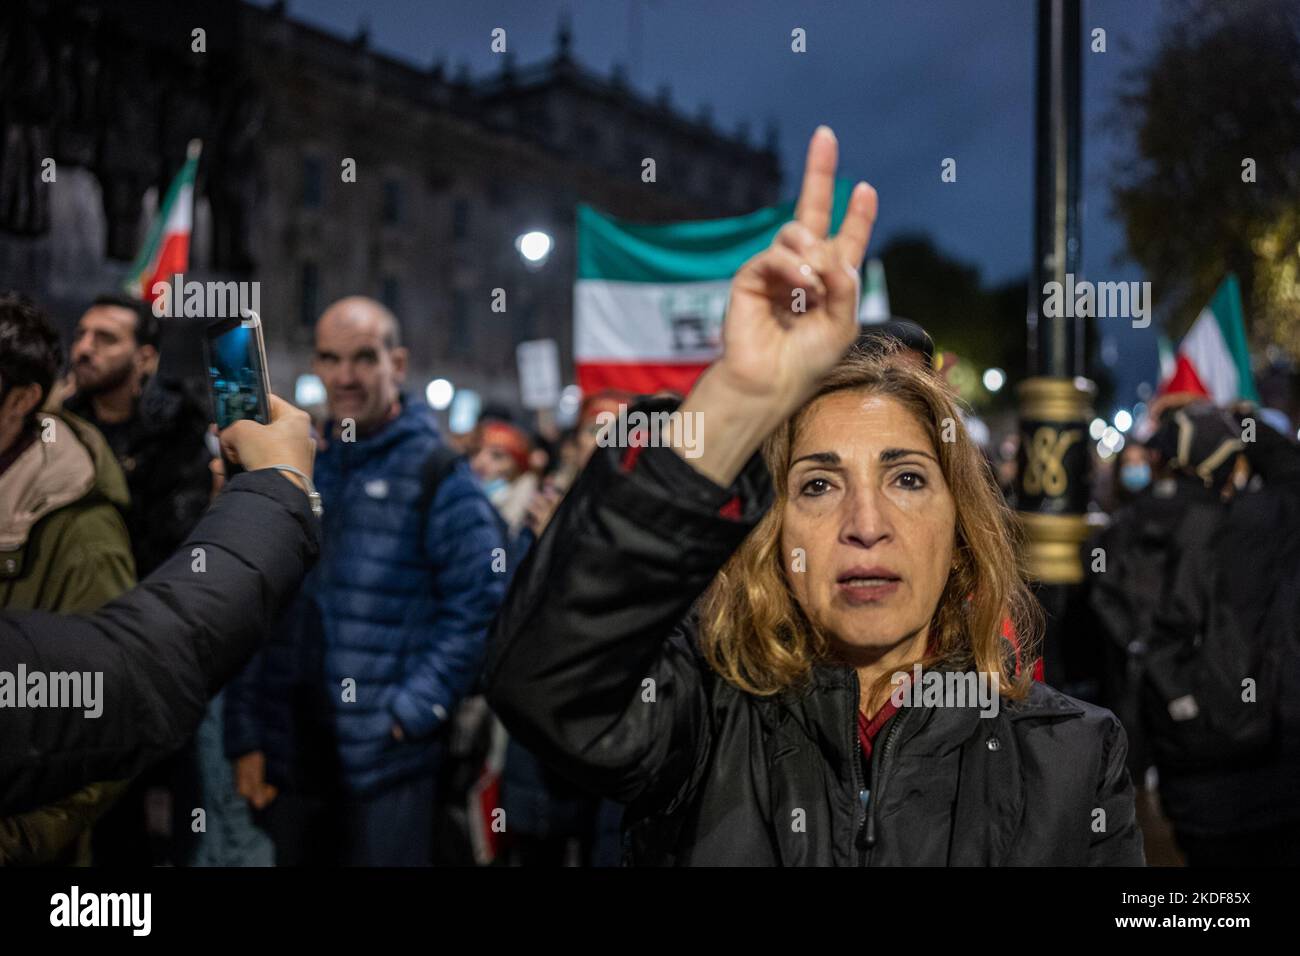 Protest continued in central London over the death of Mahsa Amini, demanding justice and the end to oppression of women in Iran. Stock Photo